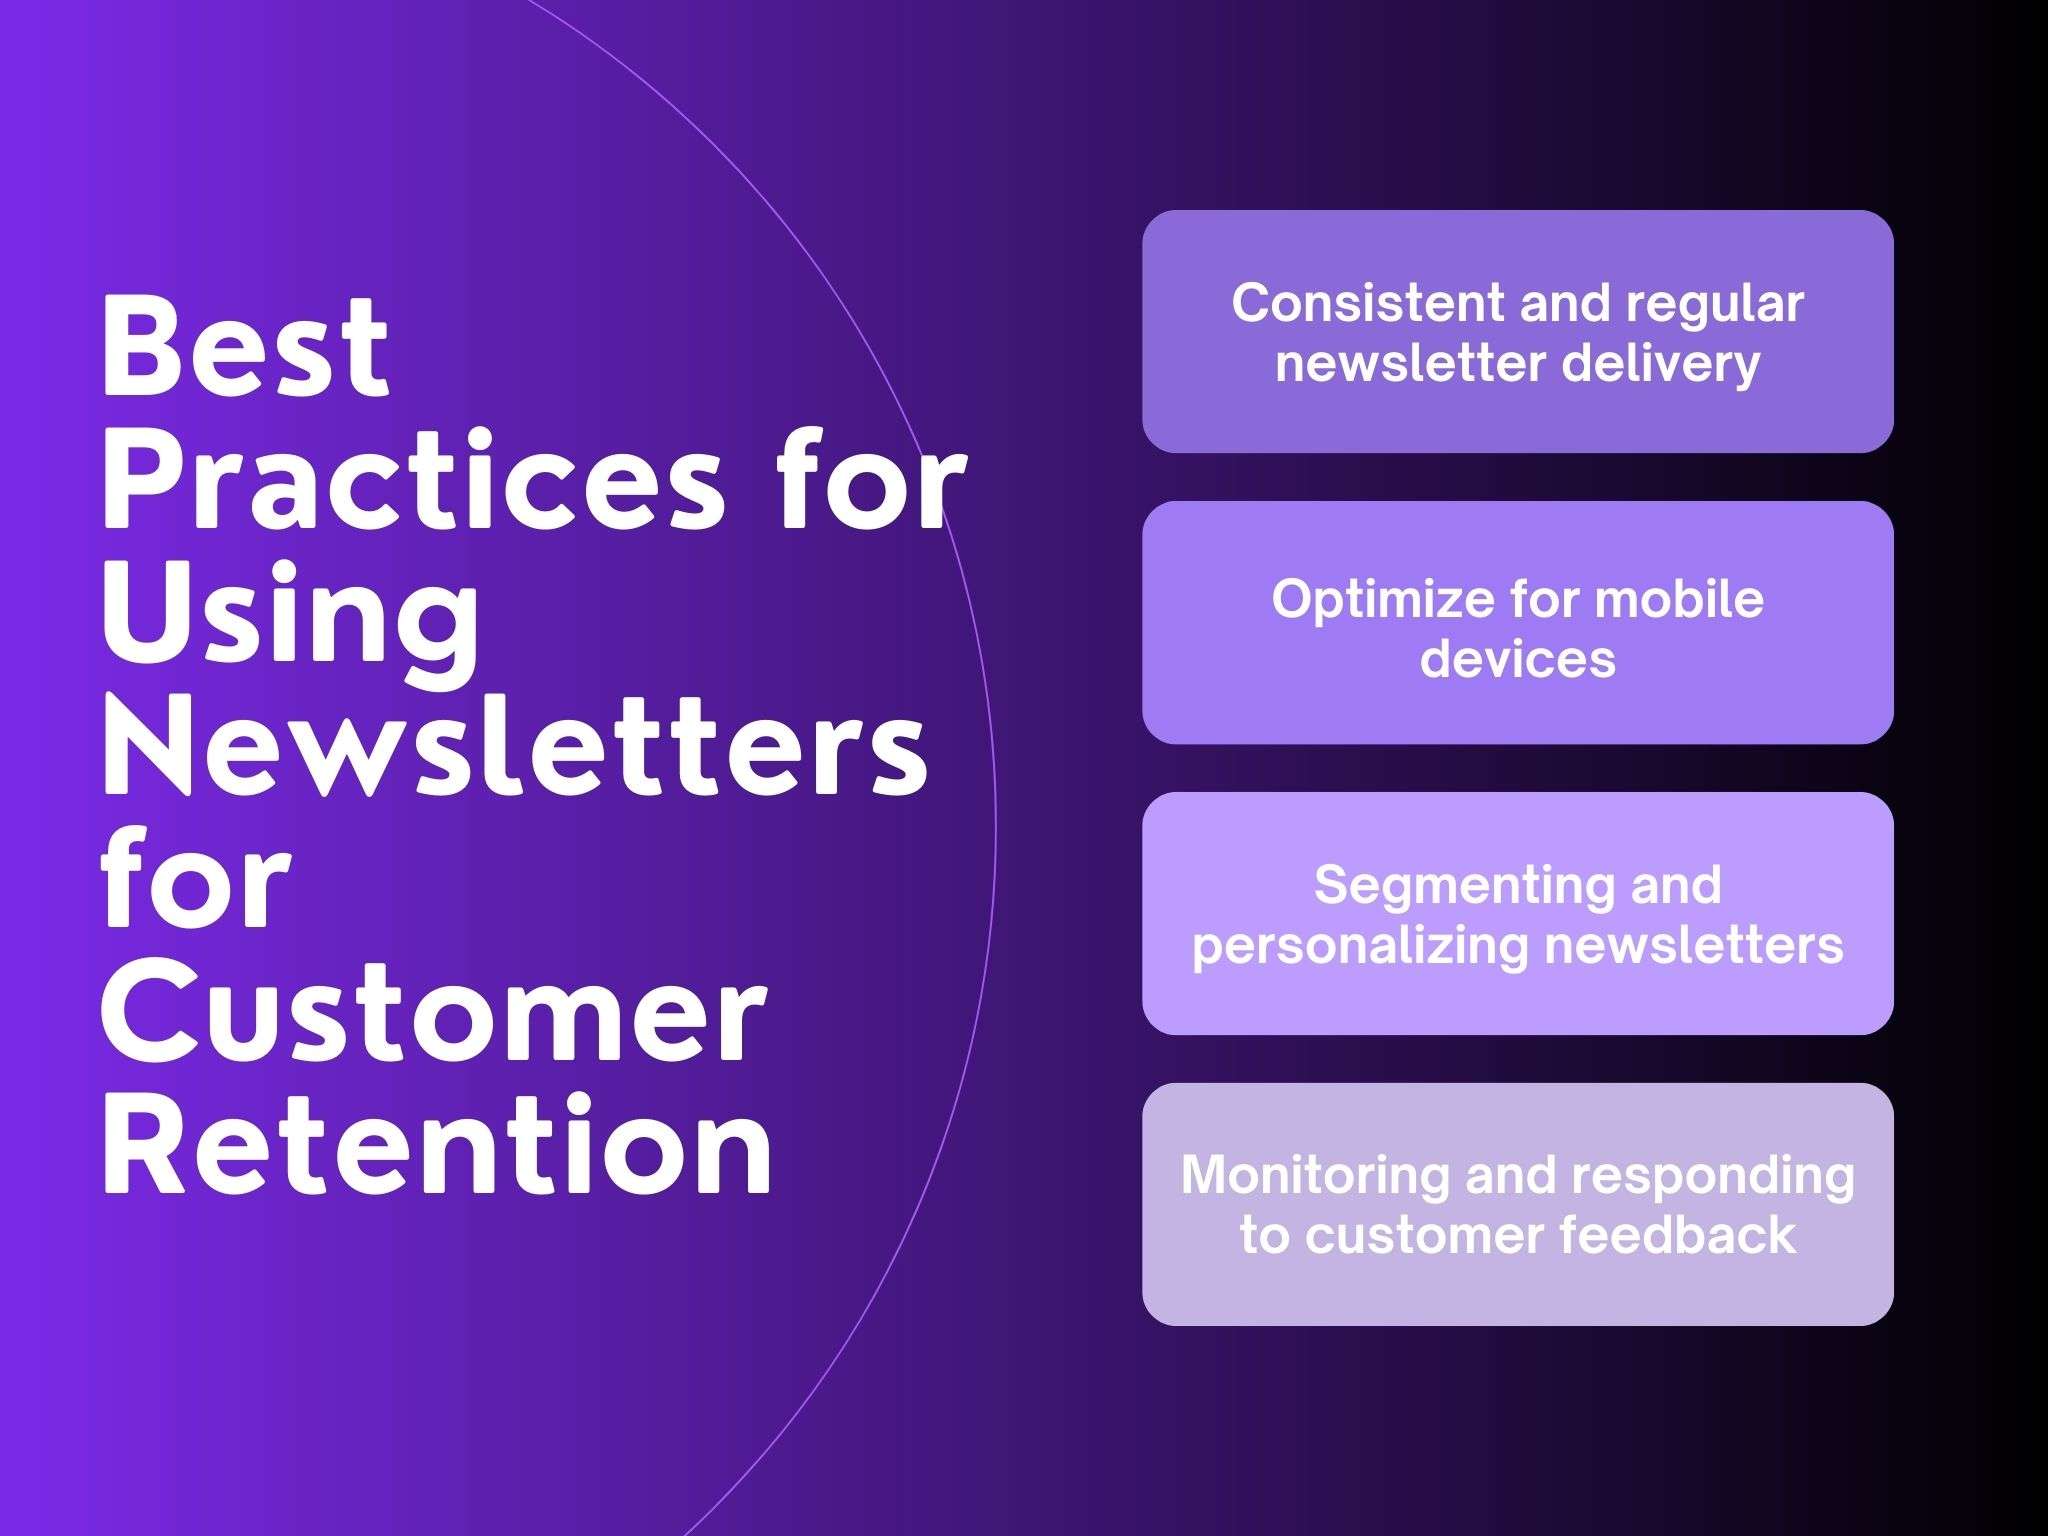 Best Practices for Using Newsletters for Customer Retention